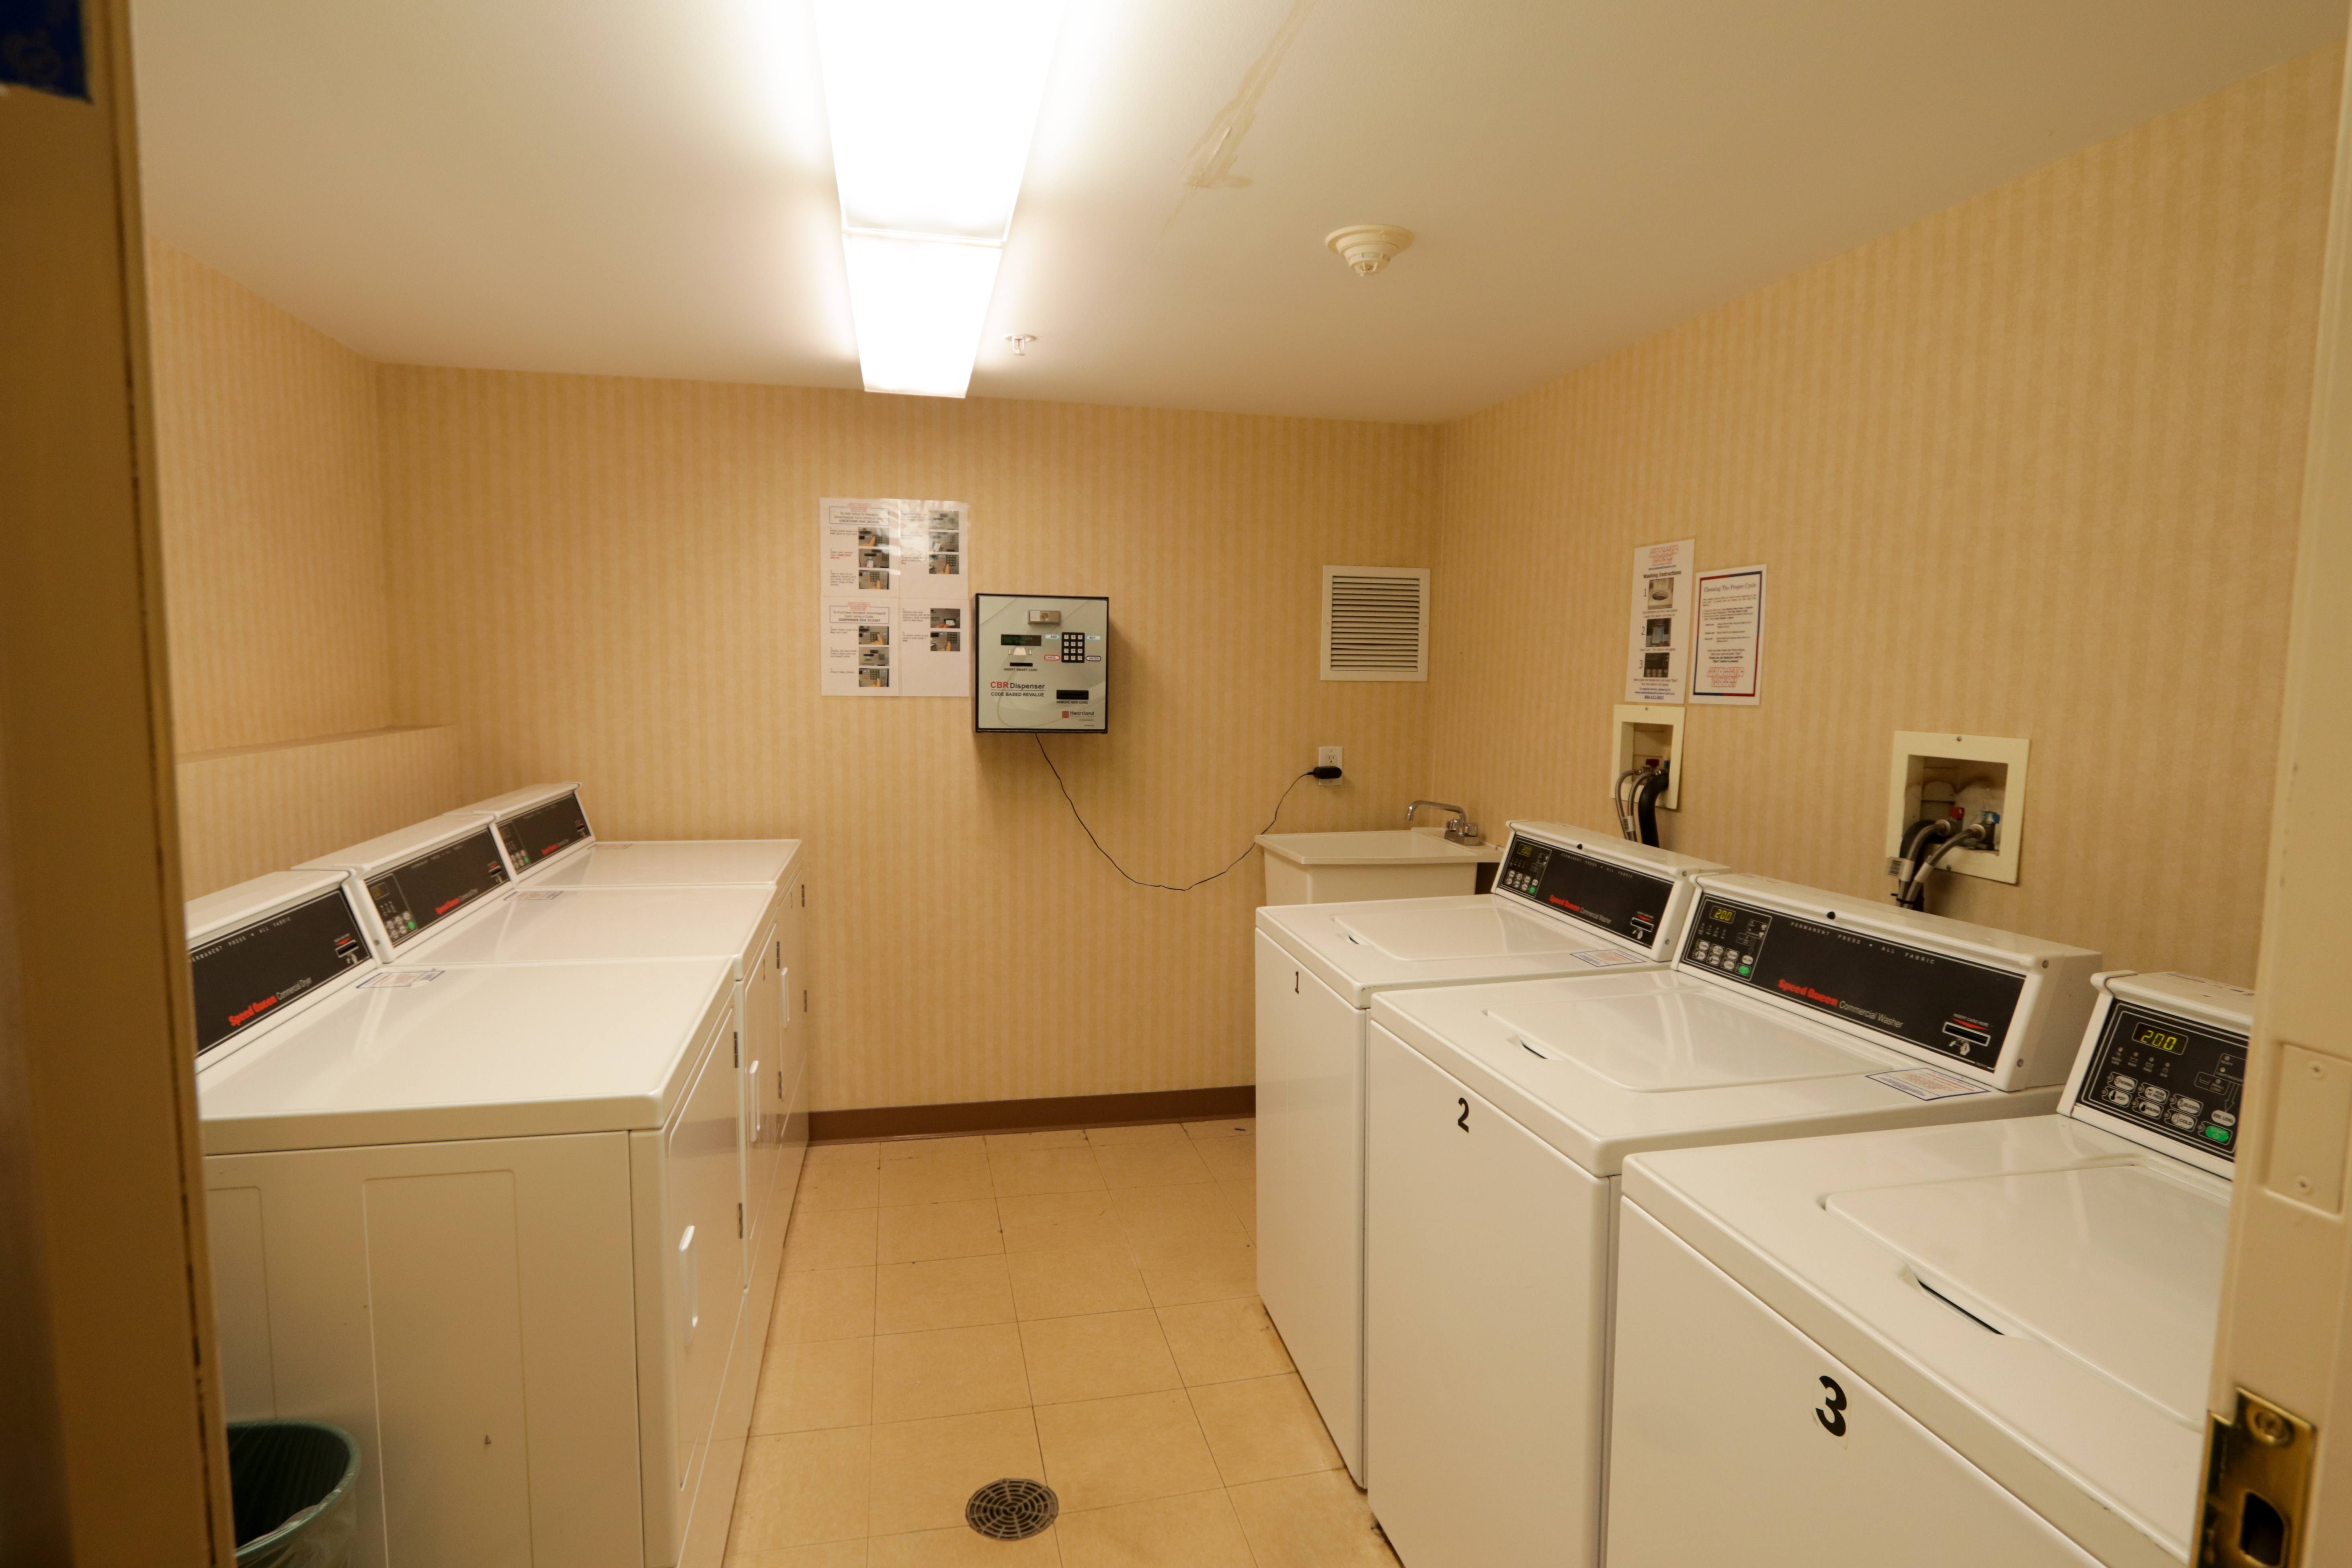 Milford condo for sale at Quarrywood Green 59 Ponemah Hill Rd Apt 2-LL2 Milford NH 03055 laundry